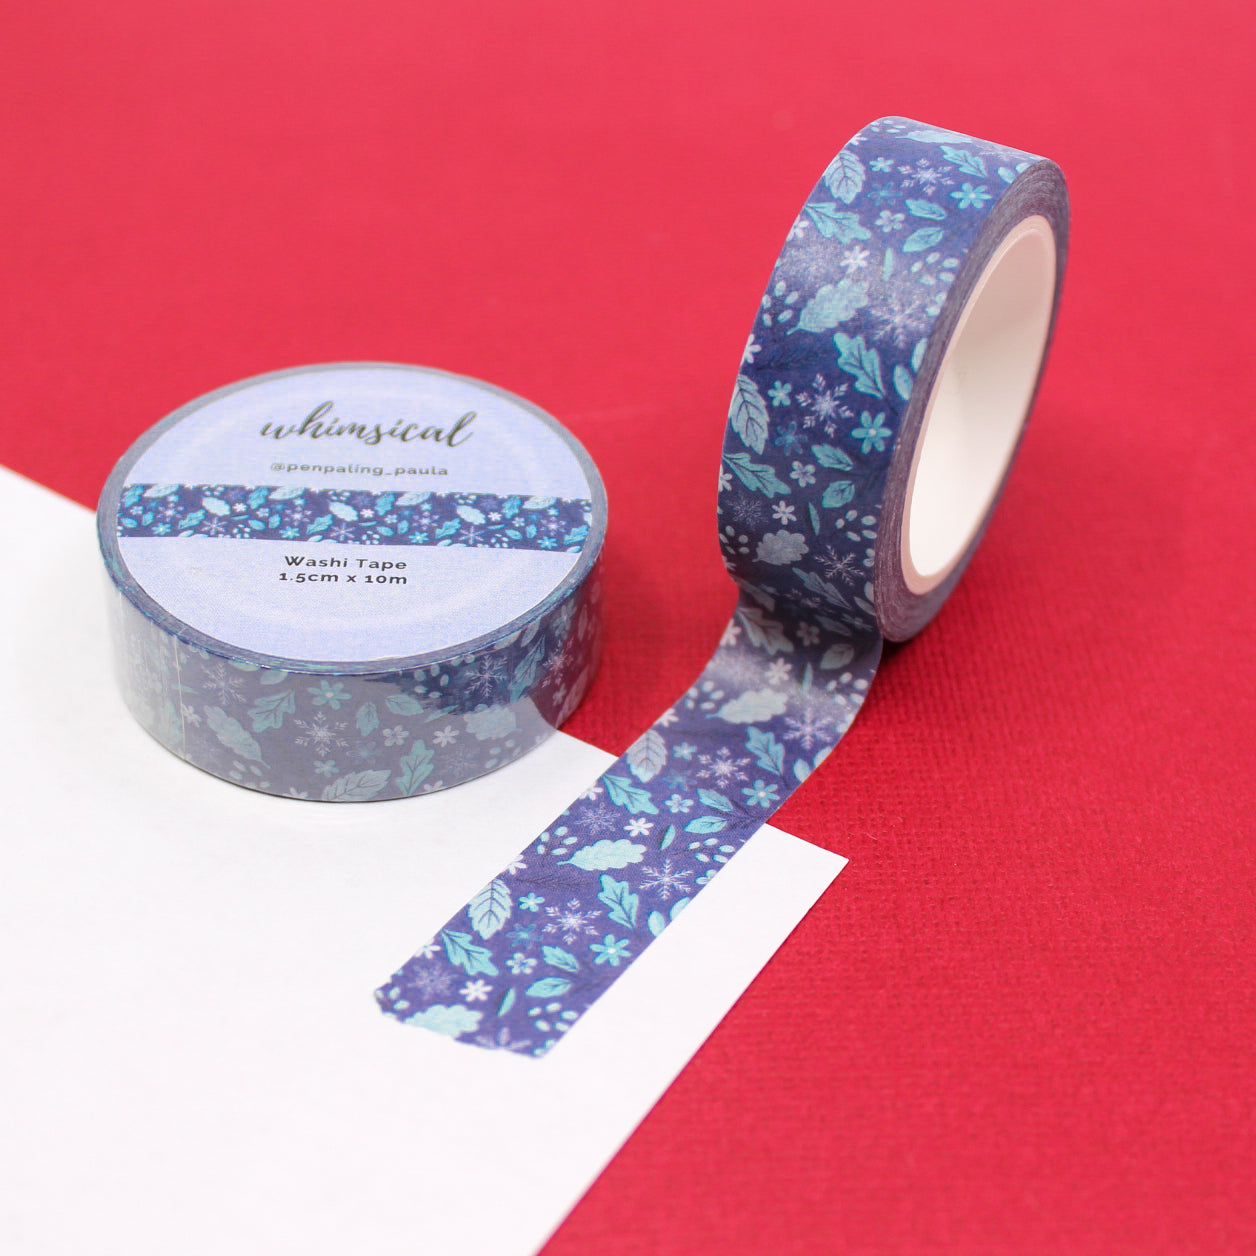 Blue Winter Leaves and Snowflakes Washi Tape featuring delicate leaf and snowflake patterns, ideal for adding a wintry touch to your holiday creations. This tape is from Penpaling Paula and sold at BBB Supplies Craft Shop.